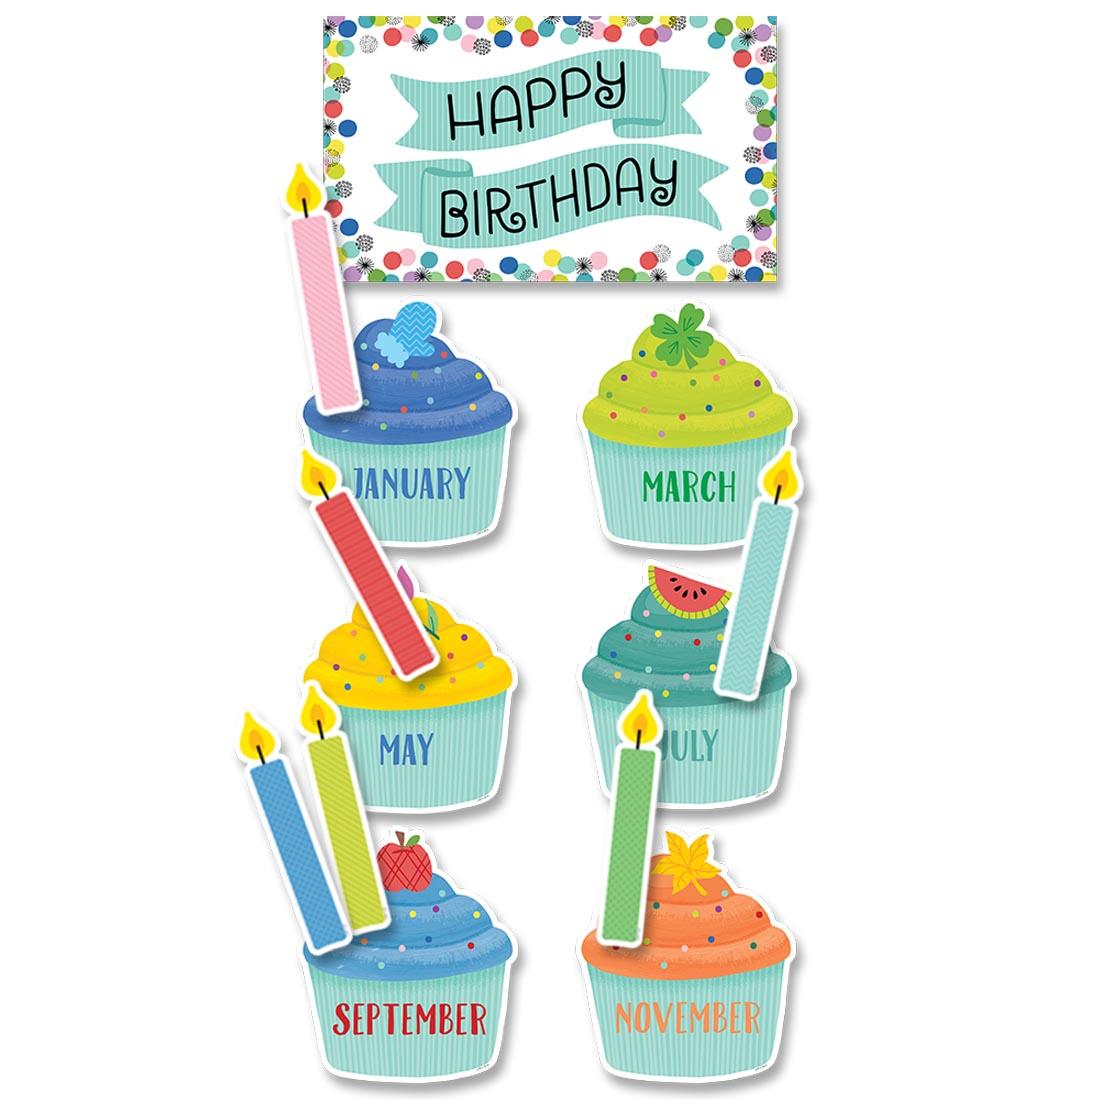 Birthday Mini Bulletin Board Set from the Color Pop collection by Creative Teaching Press